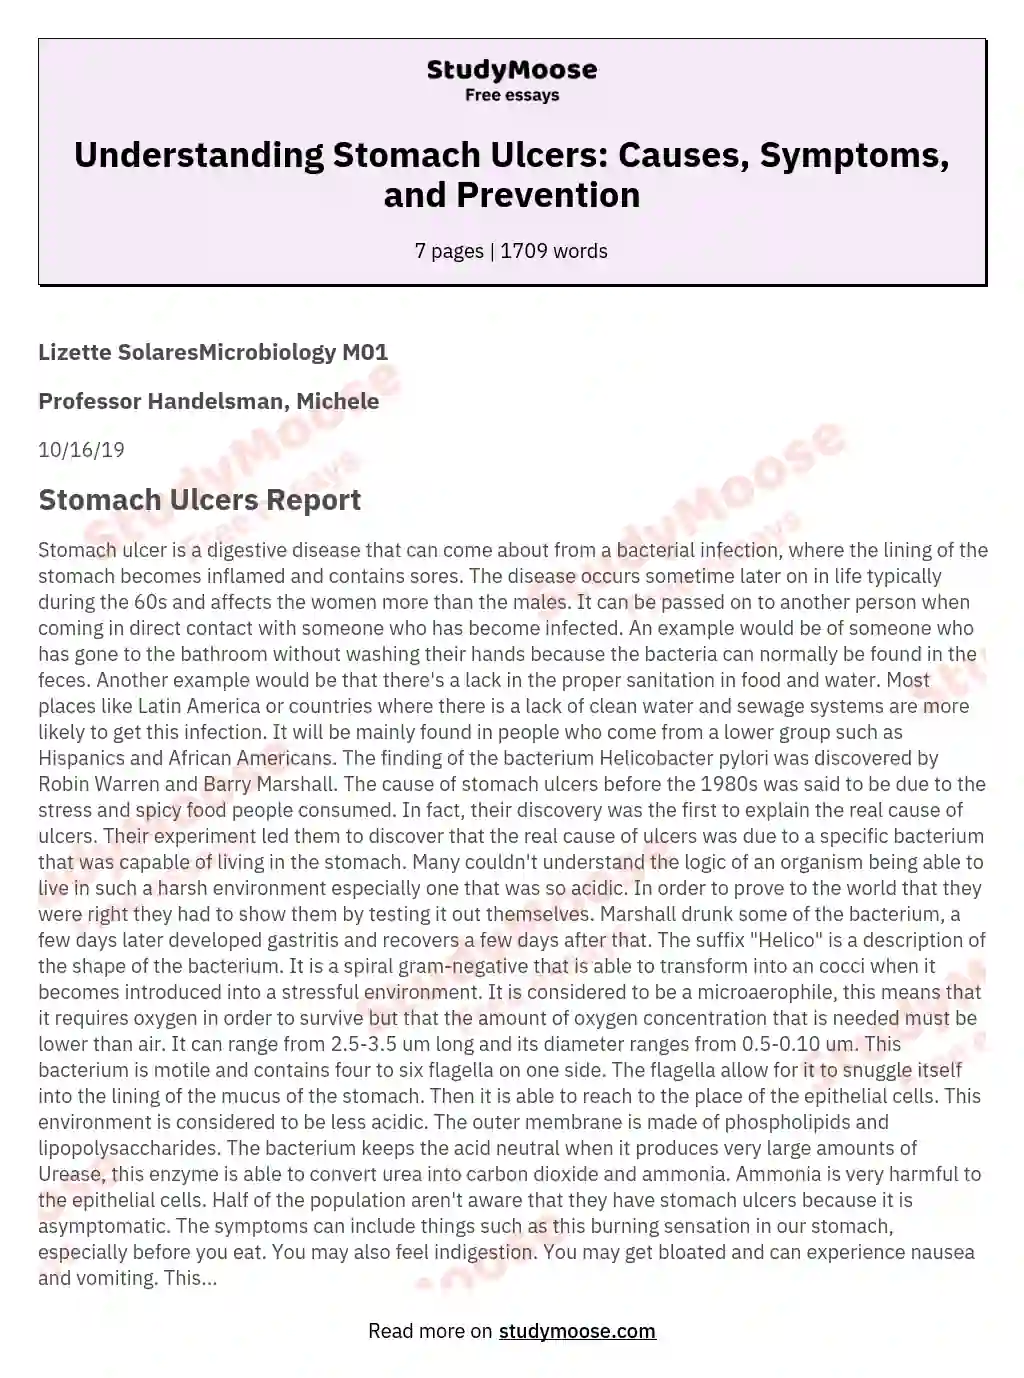 Understanding Stomach Ulcers: Causes, Symptoms, and Prevention essay